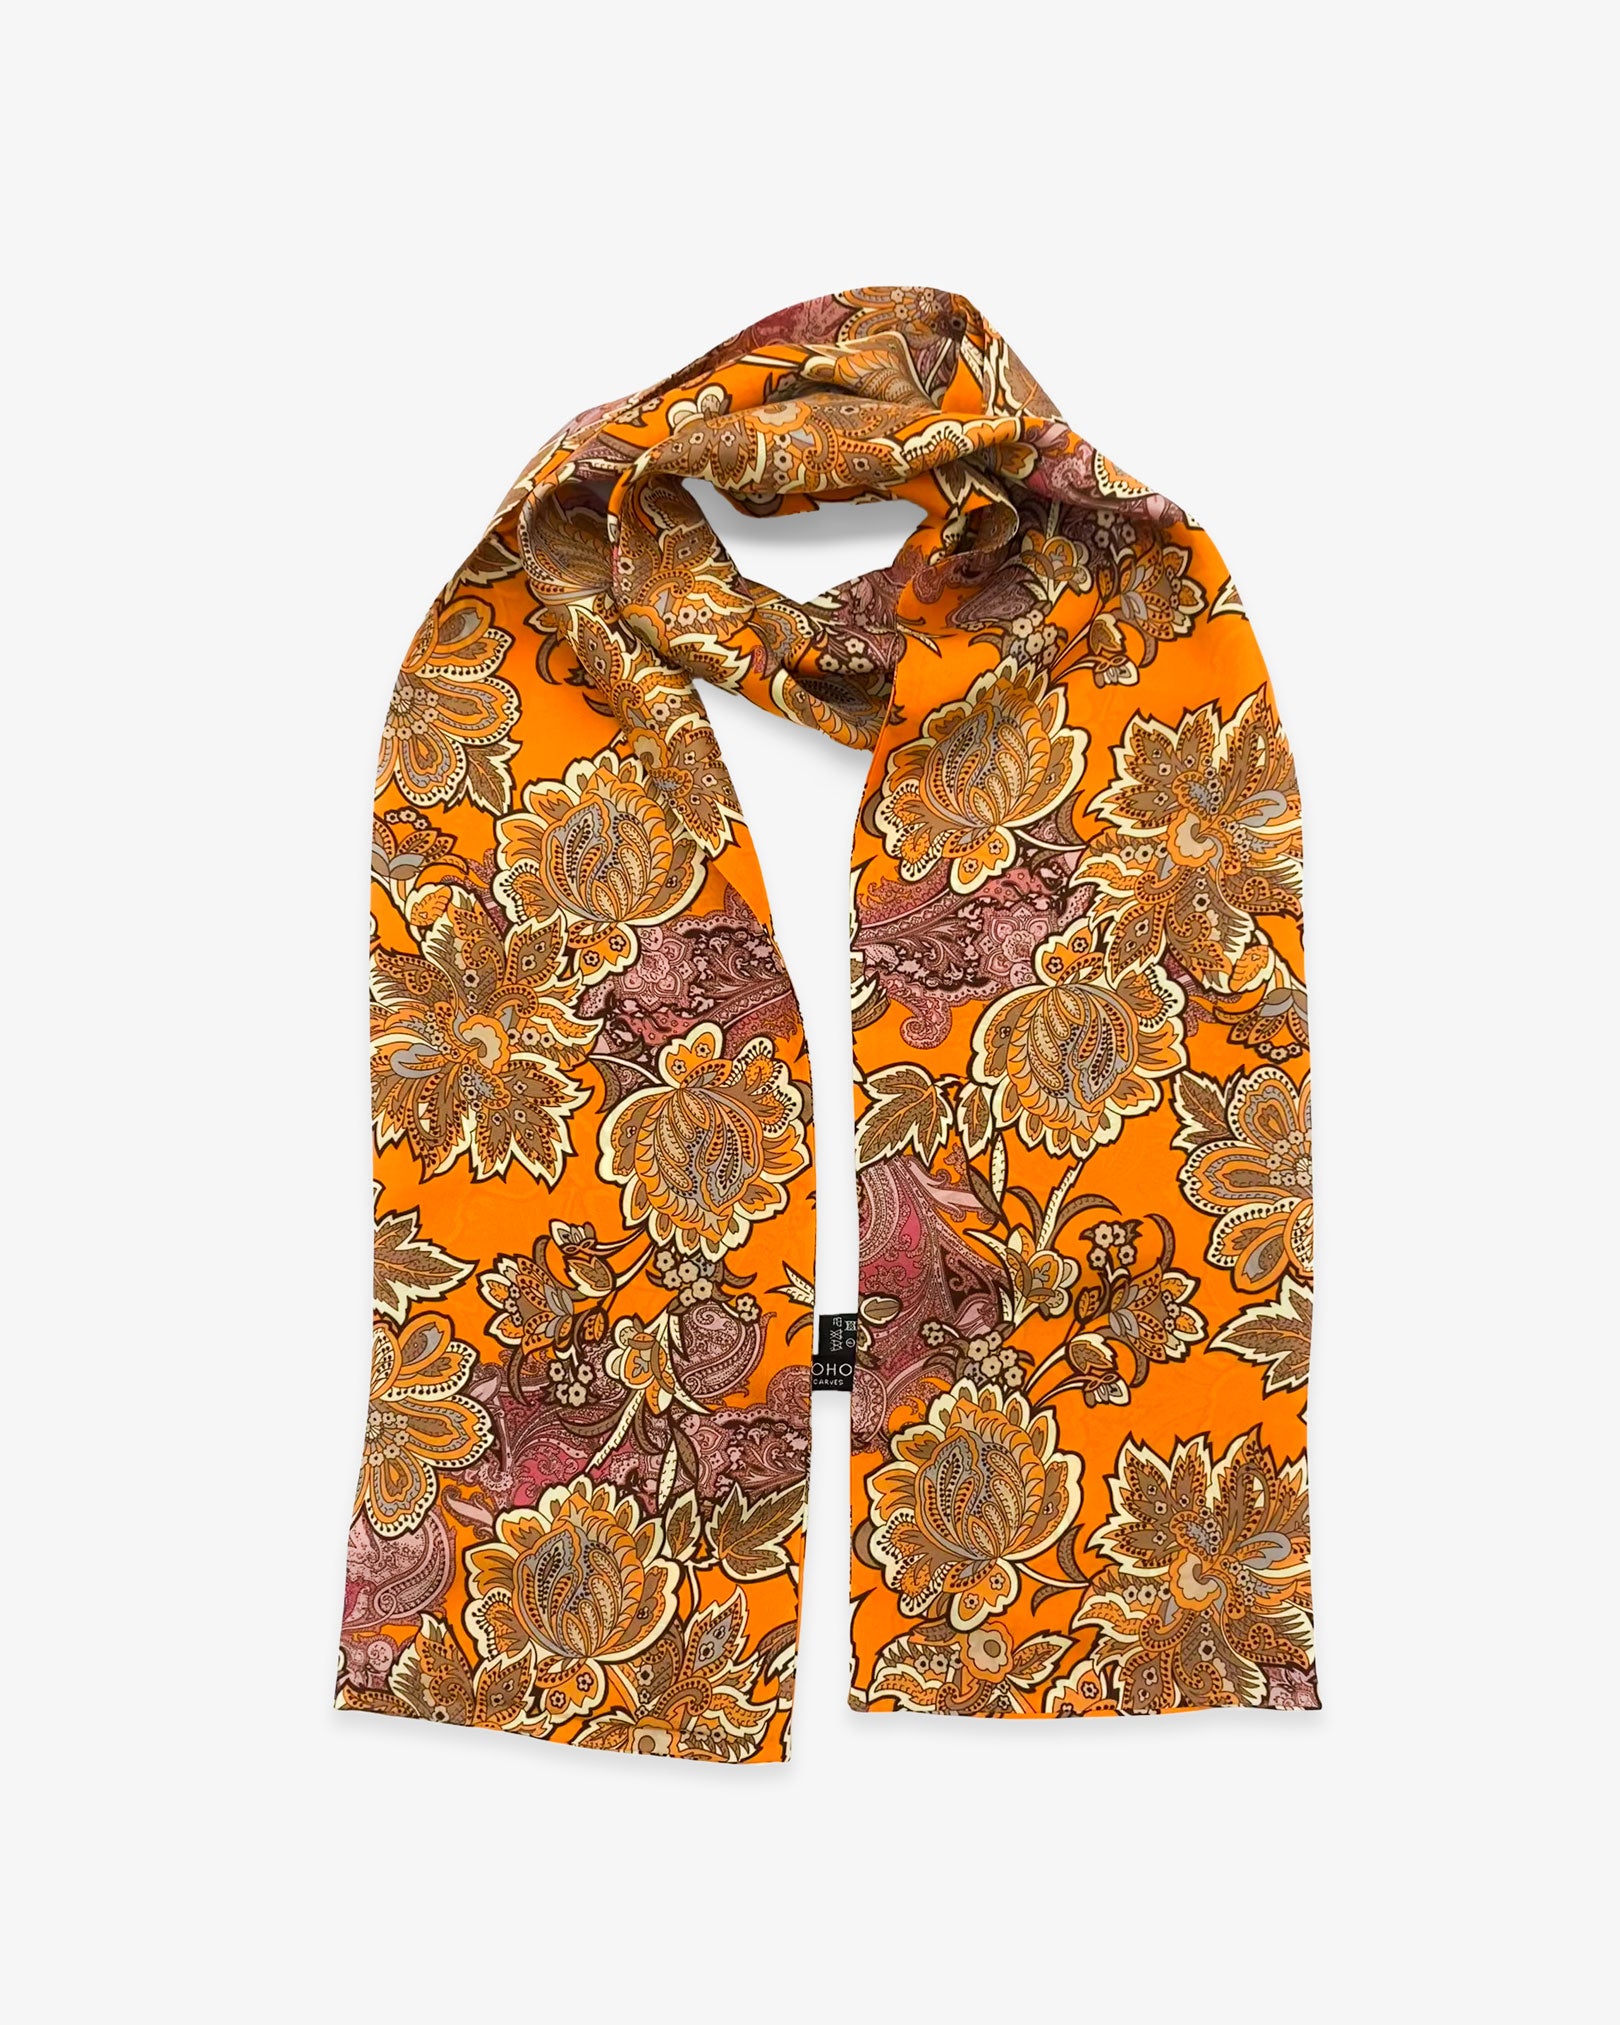 The Niagra pure silk floral scarf looped in middle with both ends parallel showing vibrant, orange background. Clearly showing the repeating pink and orange floral-paisley leaves and flowers.